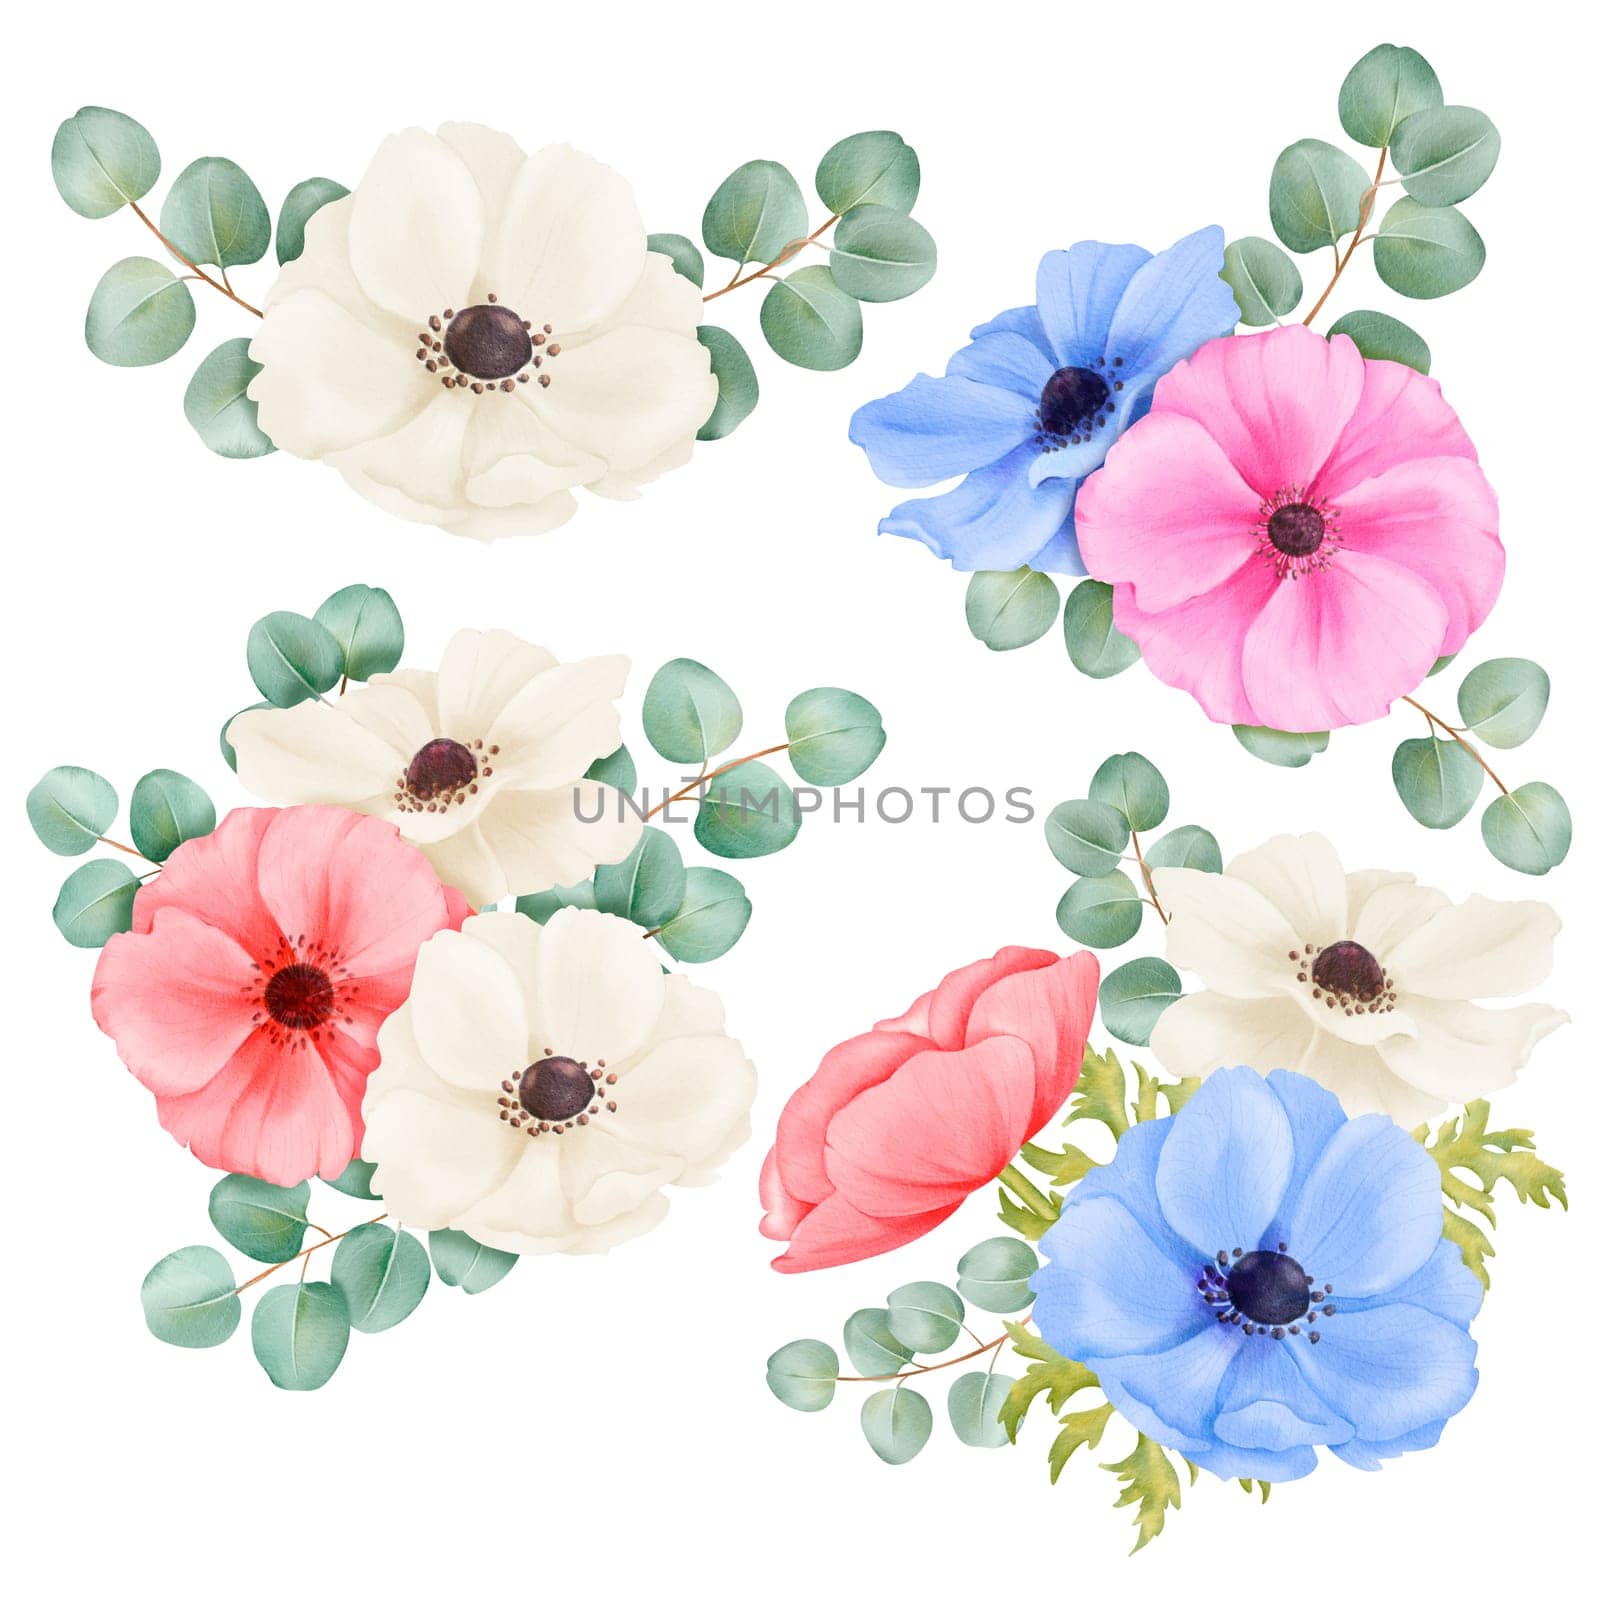 Watercolor set of floral bouquets featuring anemones in various colors and eucalyptus sprigs. Ideal for wedding invitations, greeting cards, stationery, and floral-themed designs.